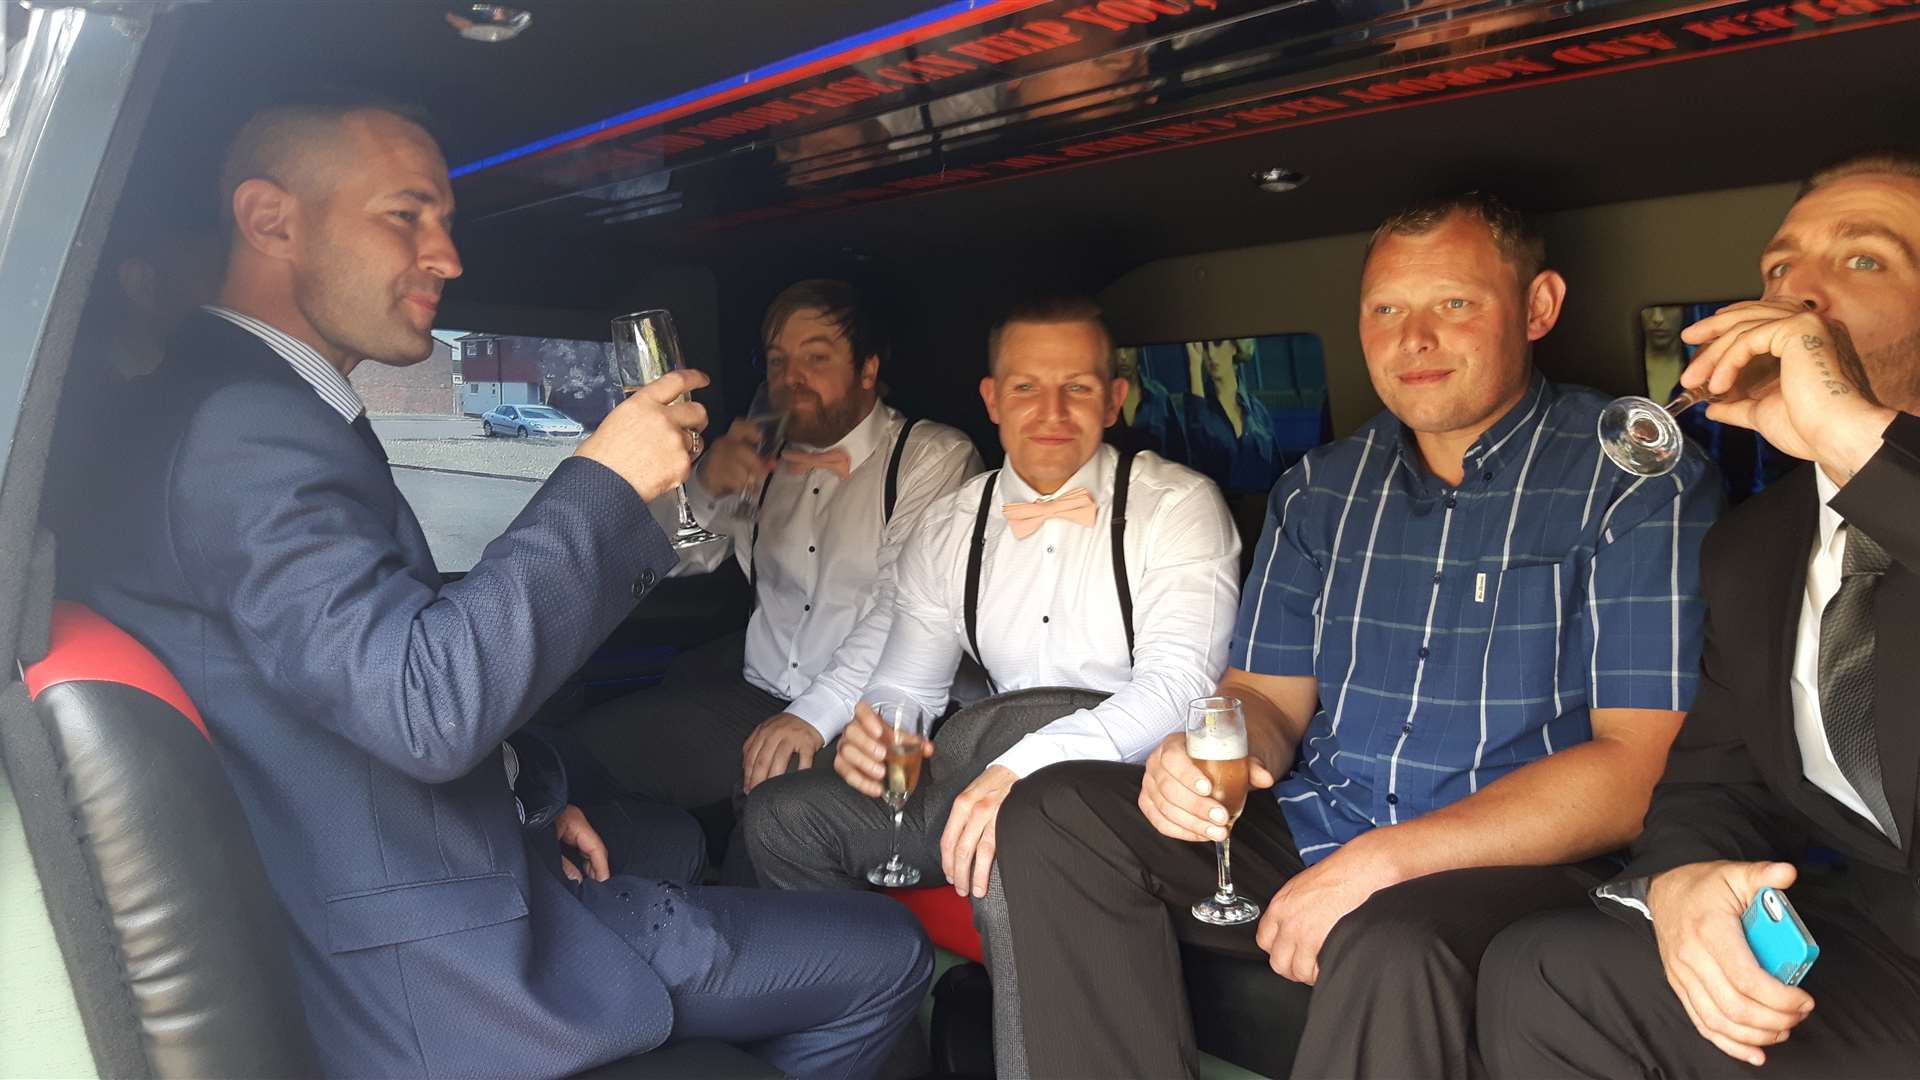 Asa and pals enjoy some champagne on their way in the A Team van